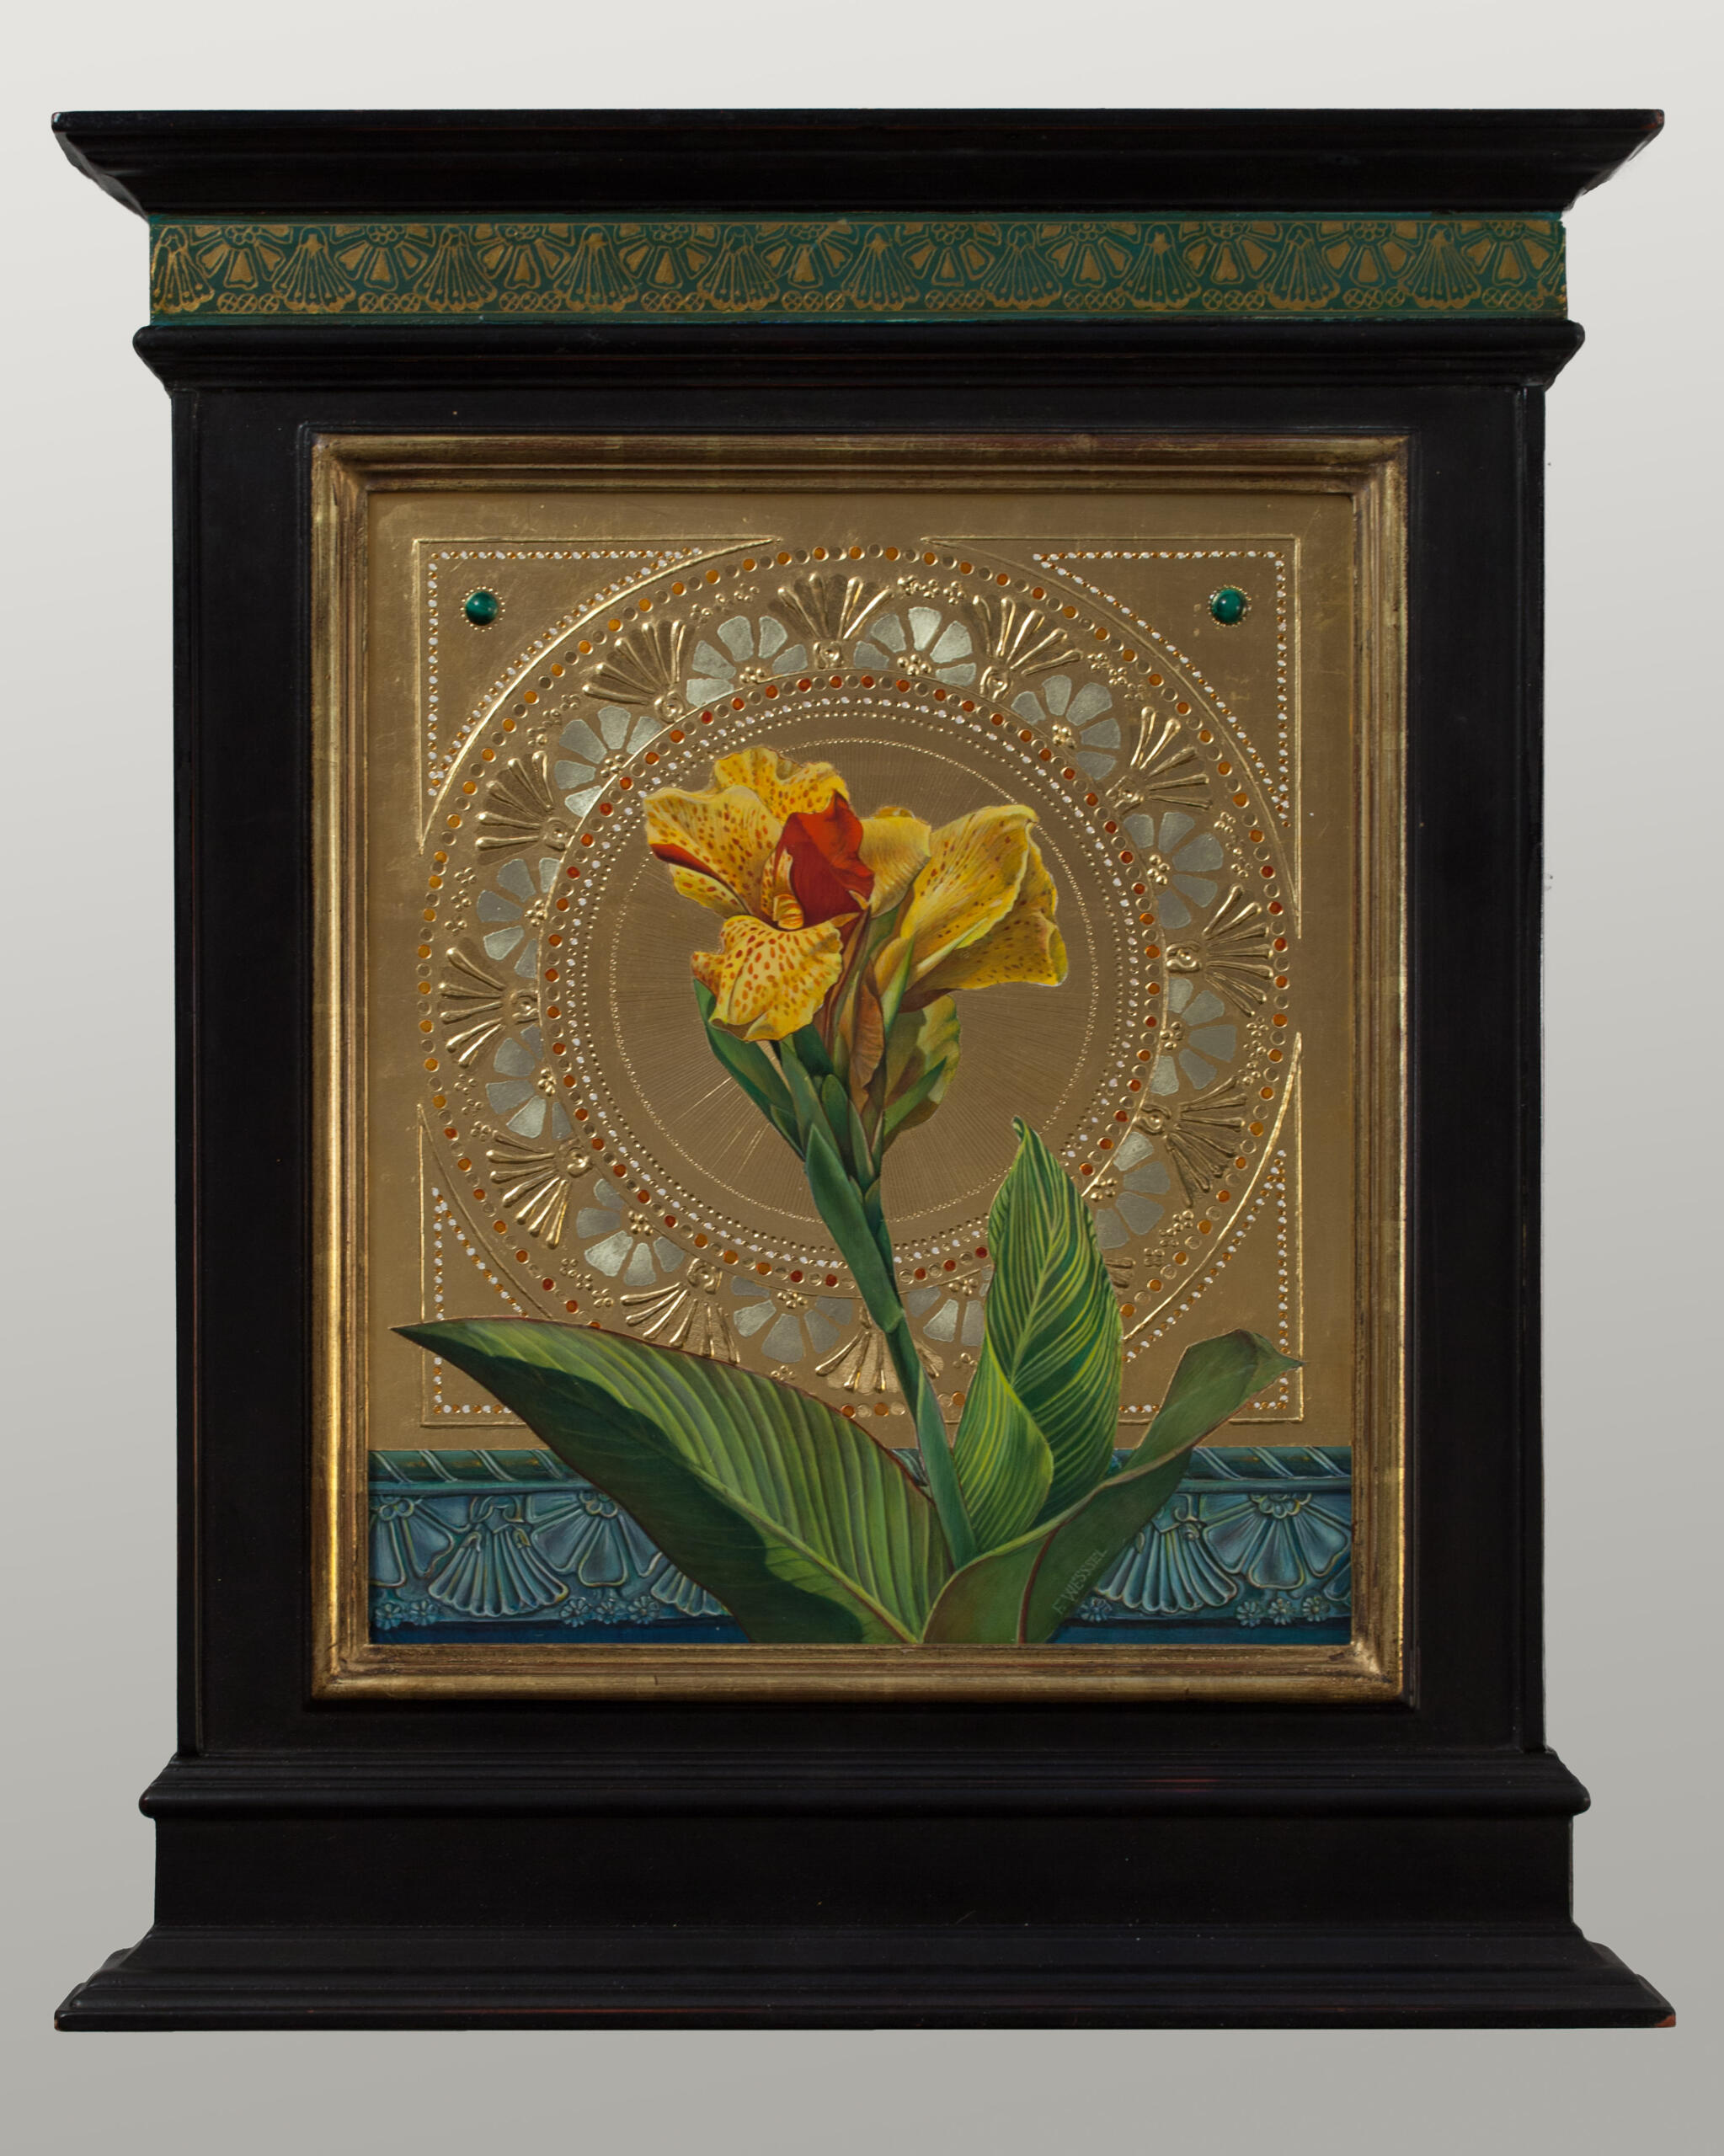 n a grandfather clock-shaped wooden frame with a horizontal golden patterned stripe near the top.